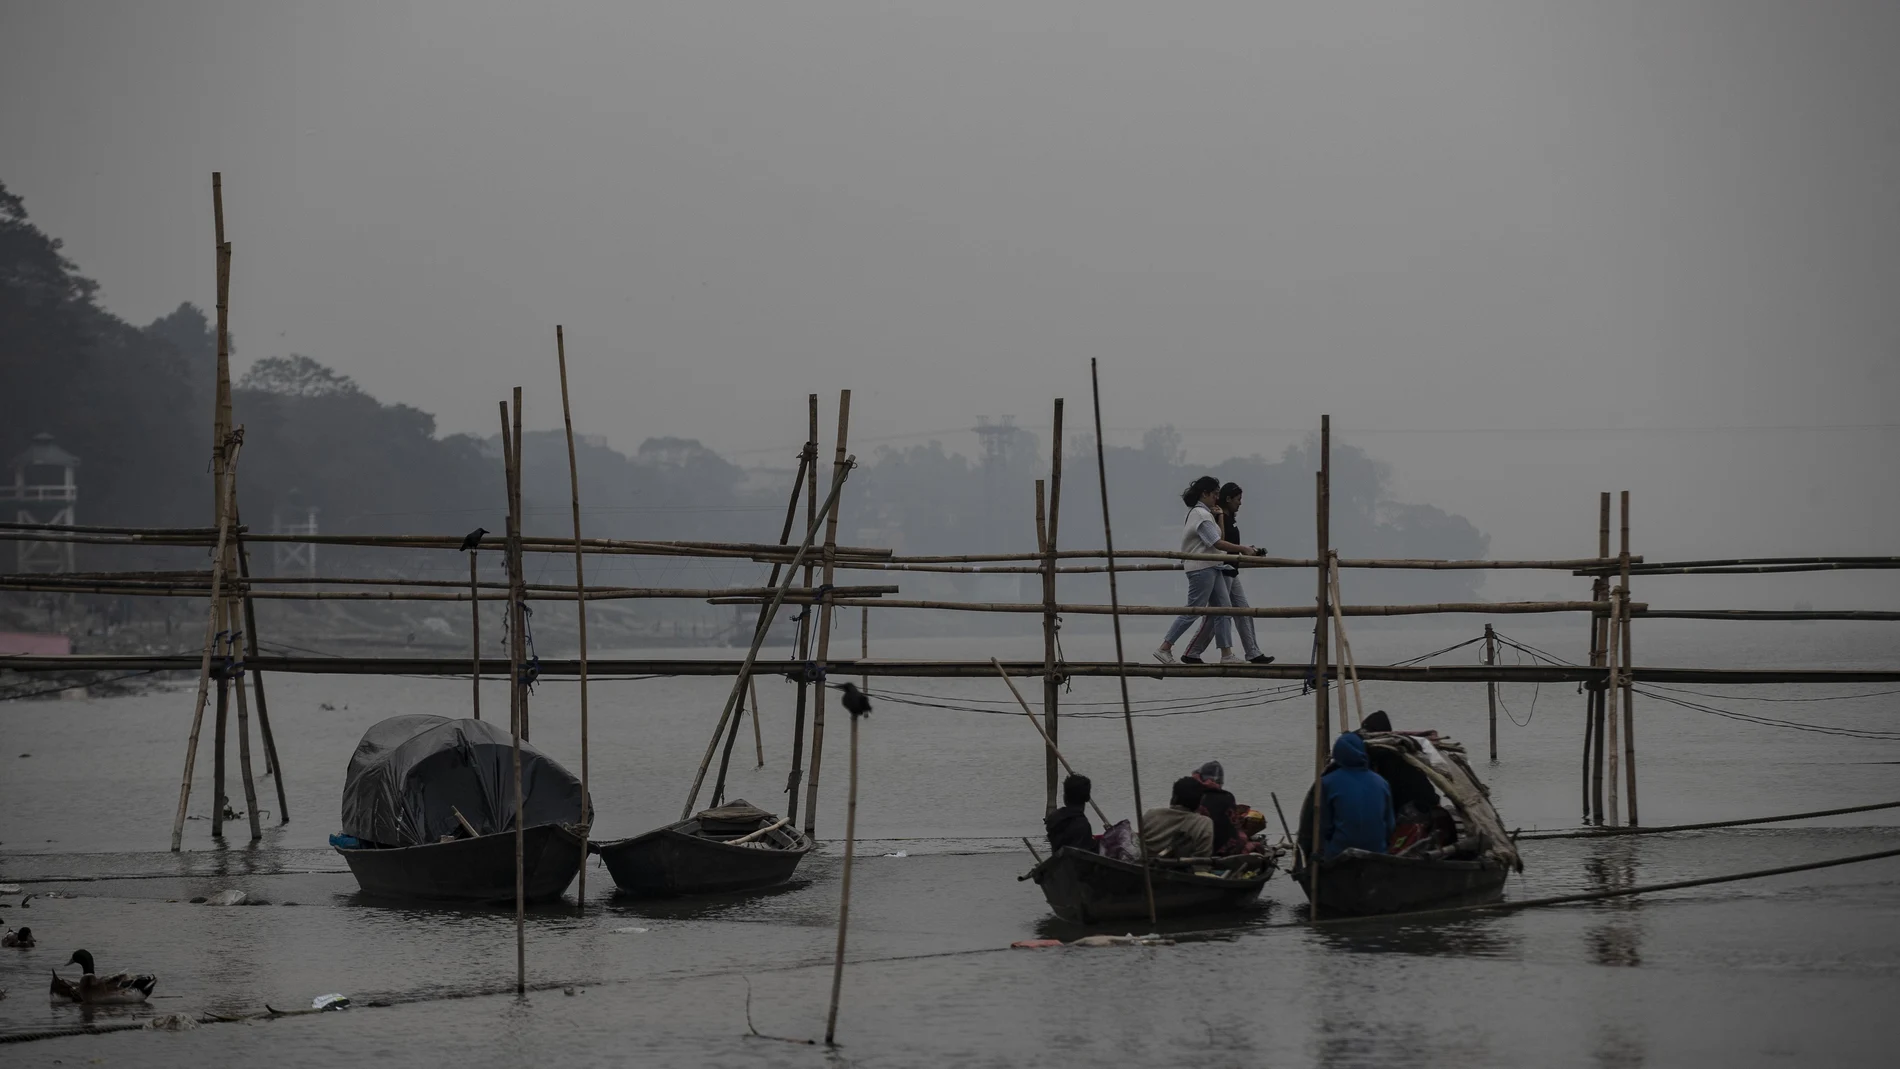 Indian girls walk on a temporary footbridge to board on a ferry as fishermen take rest in their boats in the river Brahmaputra in Gauhati, in the northeastern state of Assam, India, Monday, Jan. 11, 2021. Brahmaputra is one of Asia's largest rivers, which passes through China's Tibet region, India and Bangladesh before converging into the Bay of Bengal. (AP Photo/Anupam Nath)